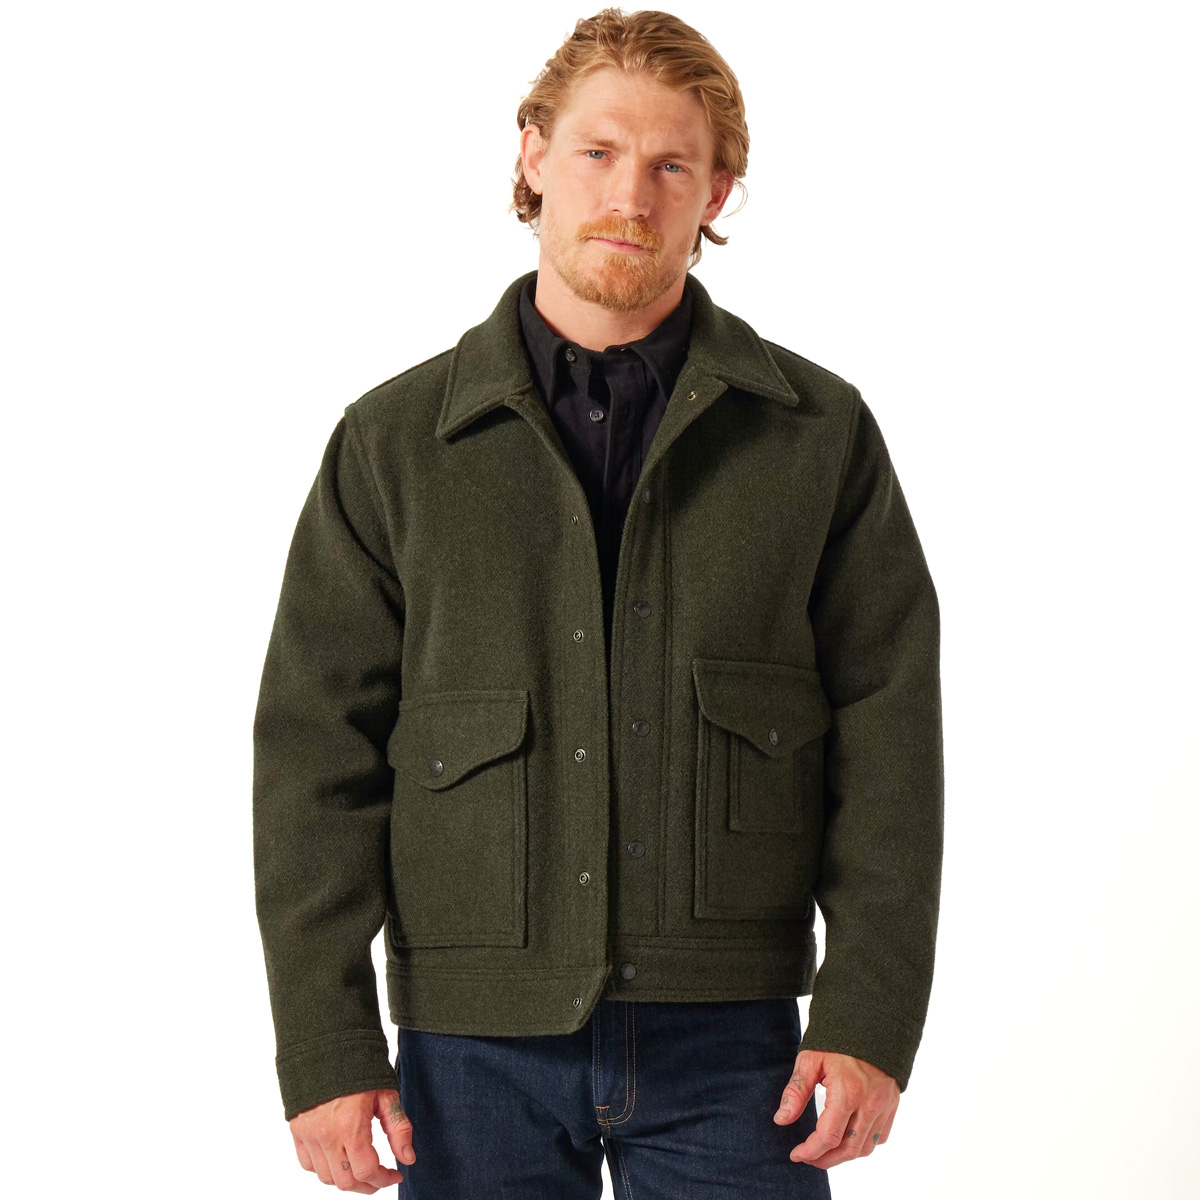 Filson Mackinaw Wool Work Jacket Forest Green, this classic jacket is a true tool for every outdoorsman.